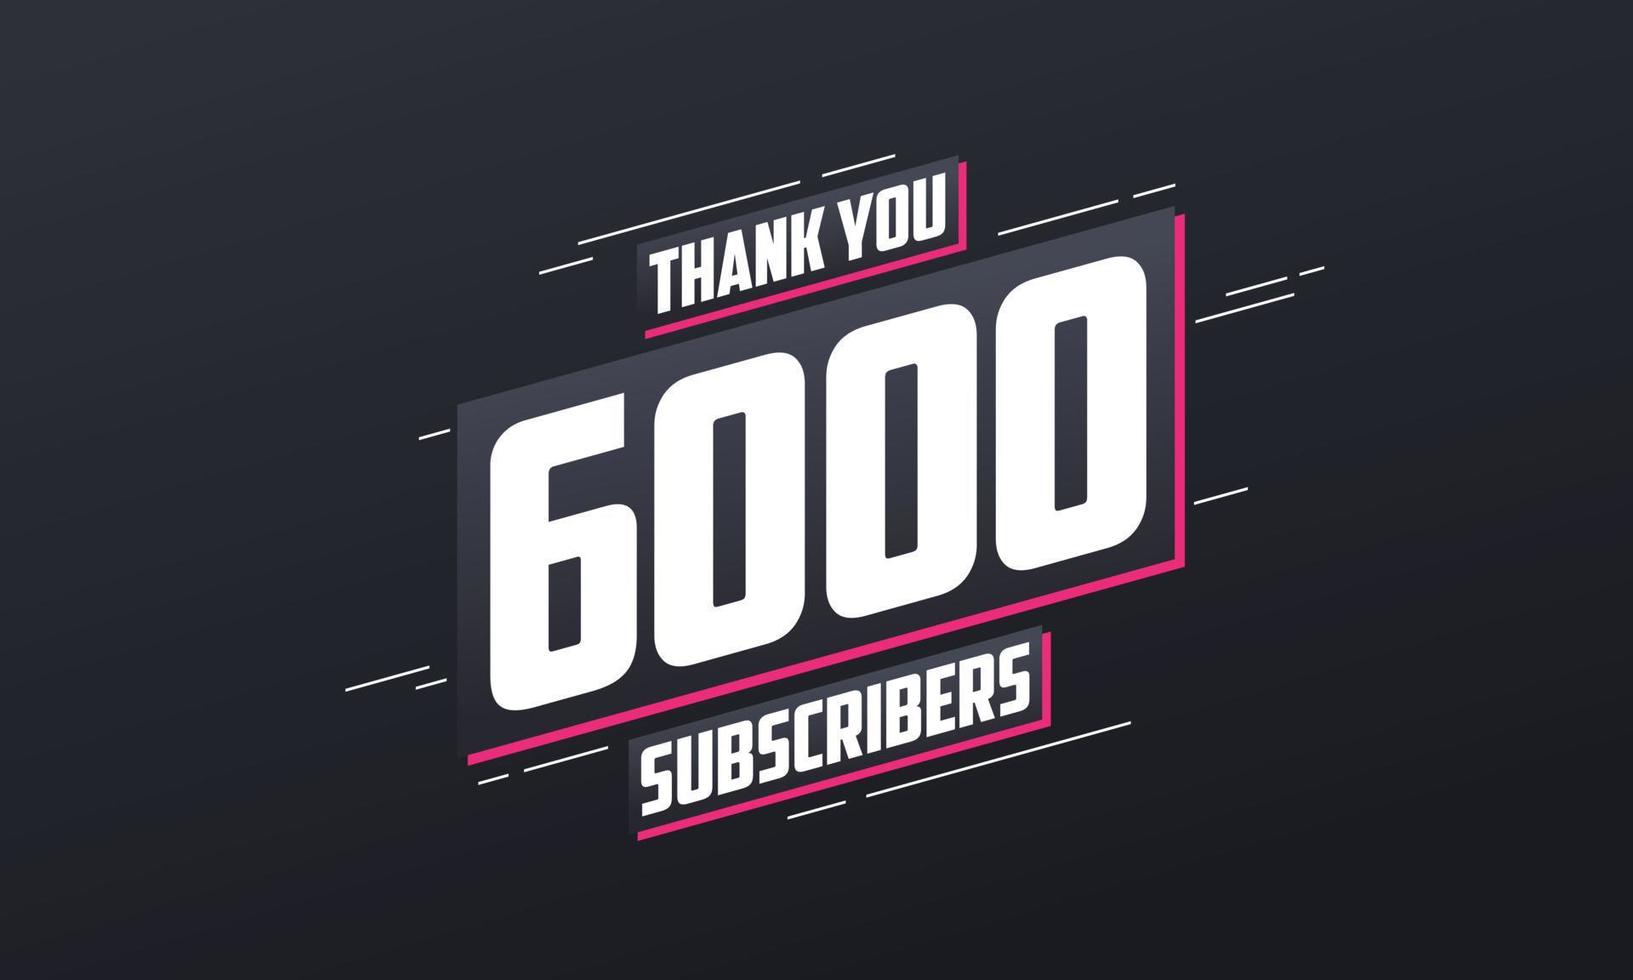 Thank you 6000 subscribers 6k subscribers celebration. vector